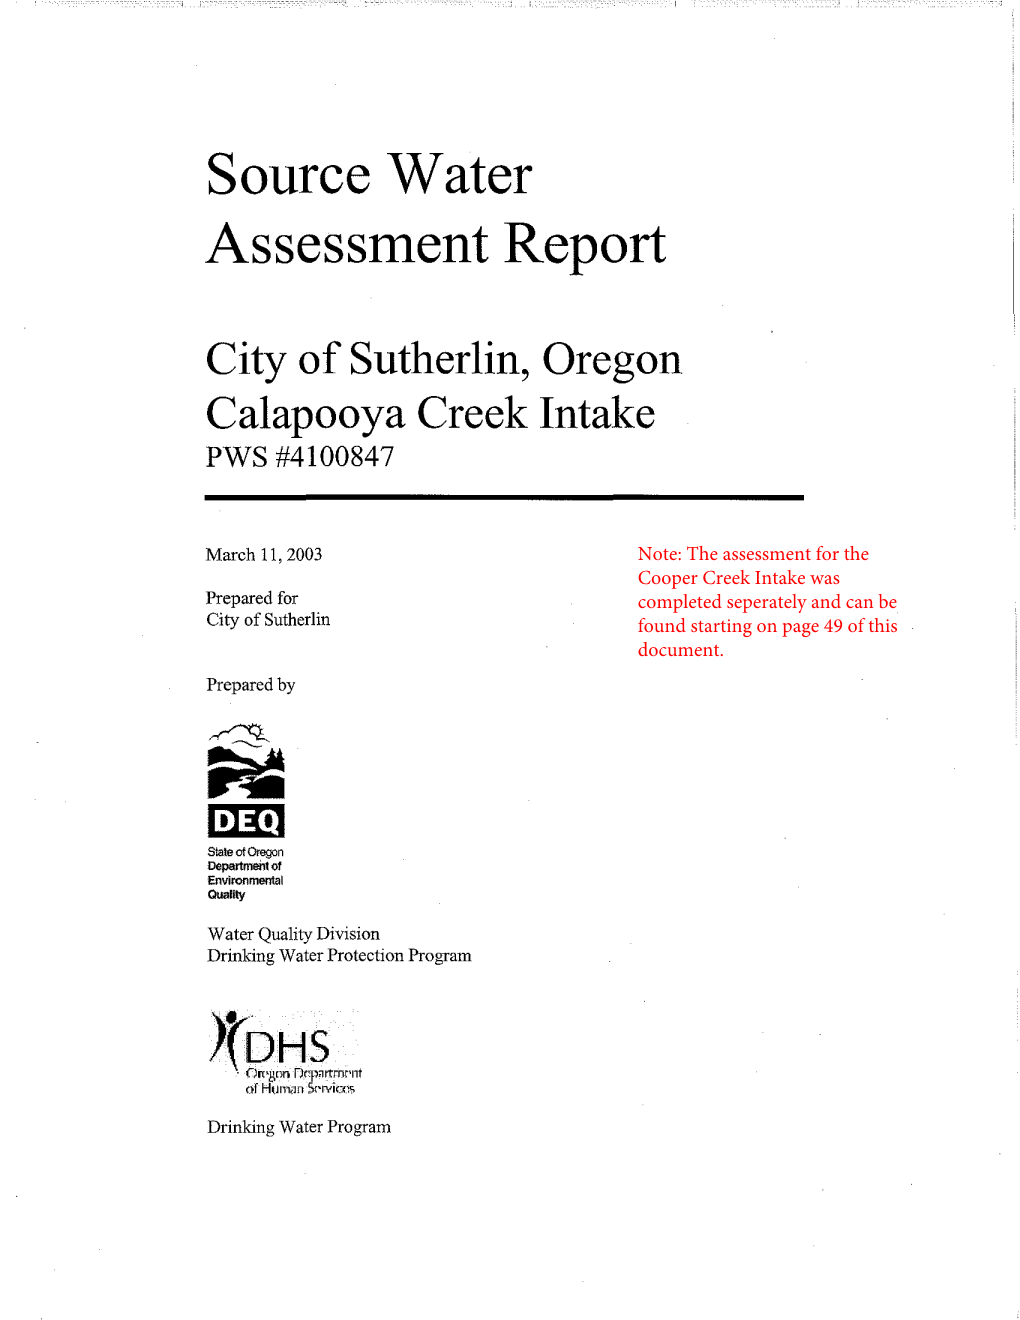 Source Water Assessment Report